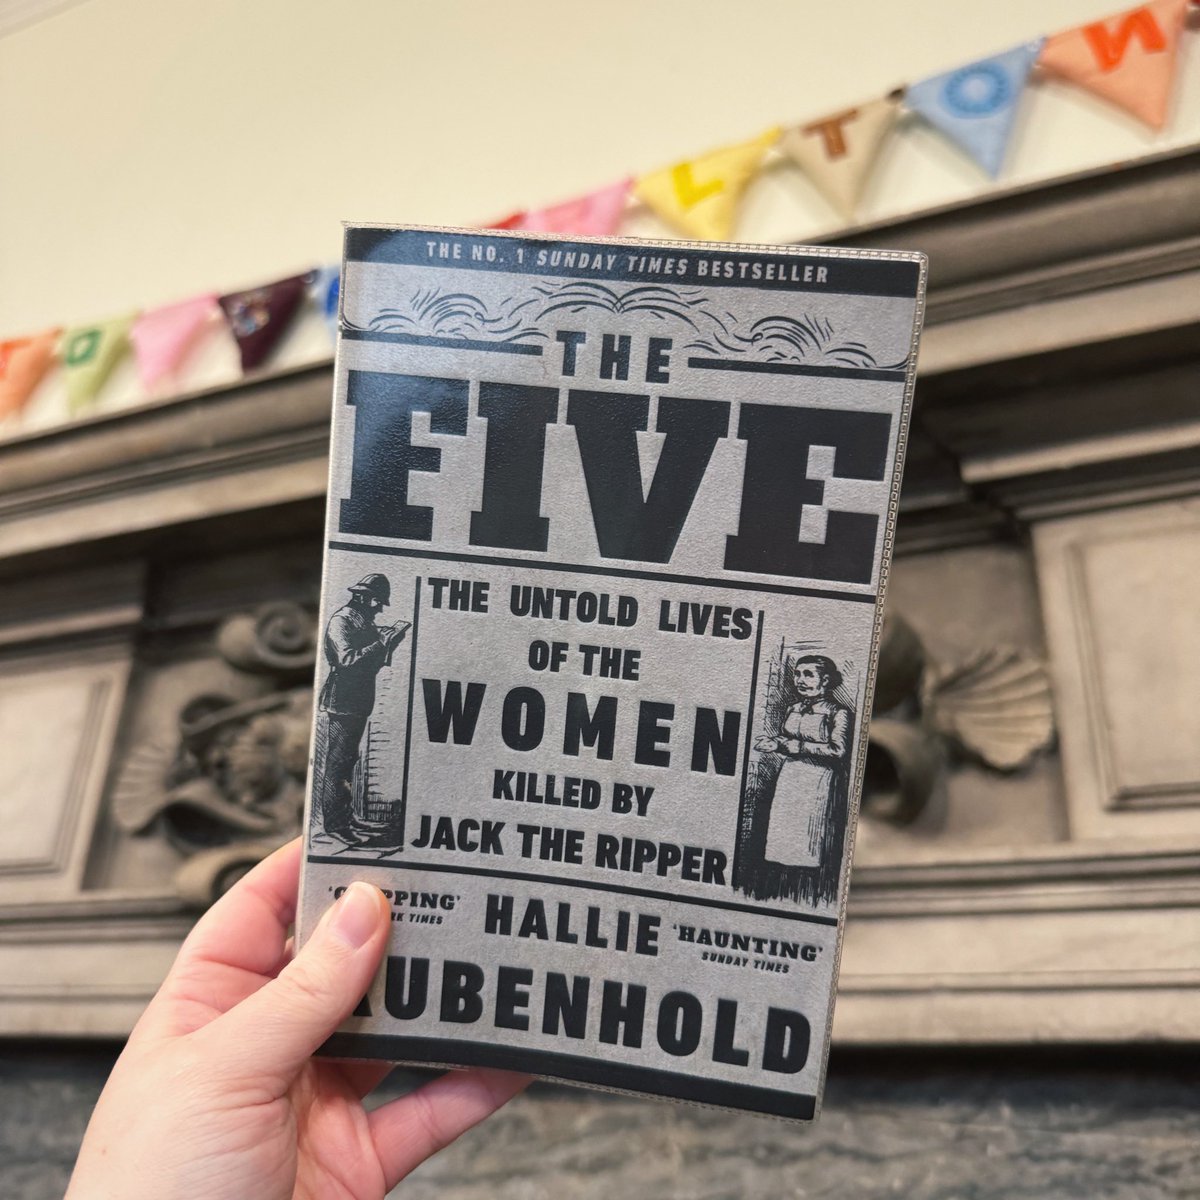 Our ‘Books and Beyond’ evening Reading Group enjoyed discussing this month’s book ‘The Five: The untold lives’ by #HallieRubenhold at #CharltonLibrary last week! 📖 We have great conversations about books. Ask to join next time you visit, new members welcome! #LoveYourLibrary